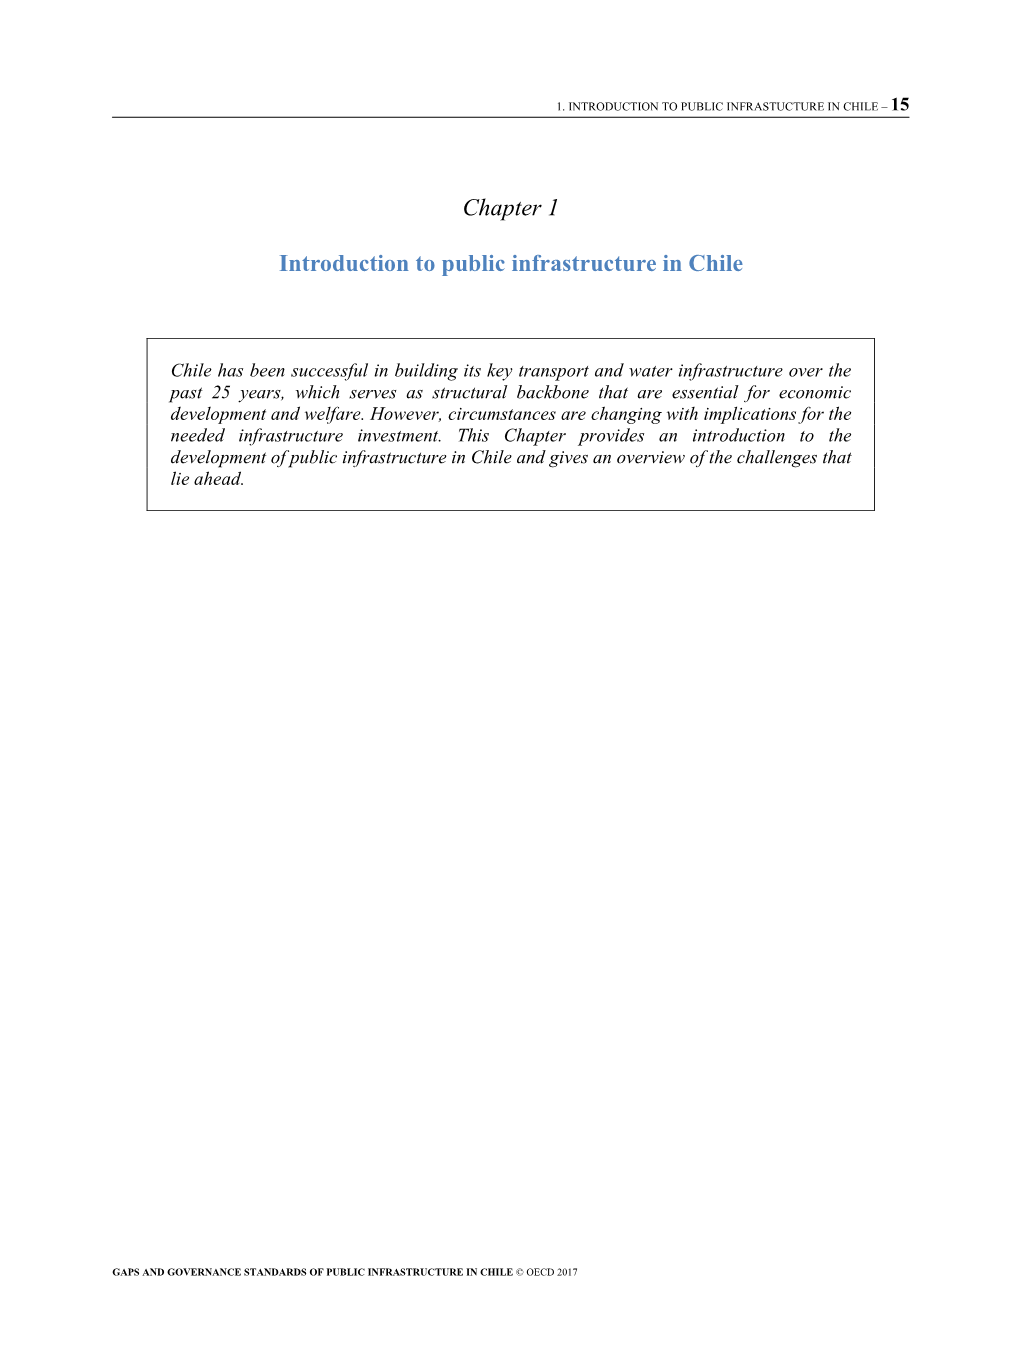 Chapter 1 Introduction to Public Infrastructure in Chile